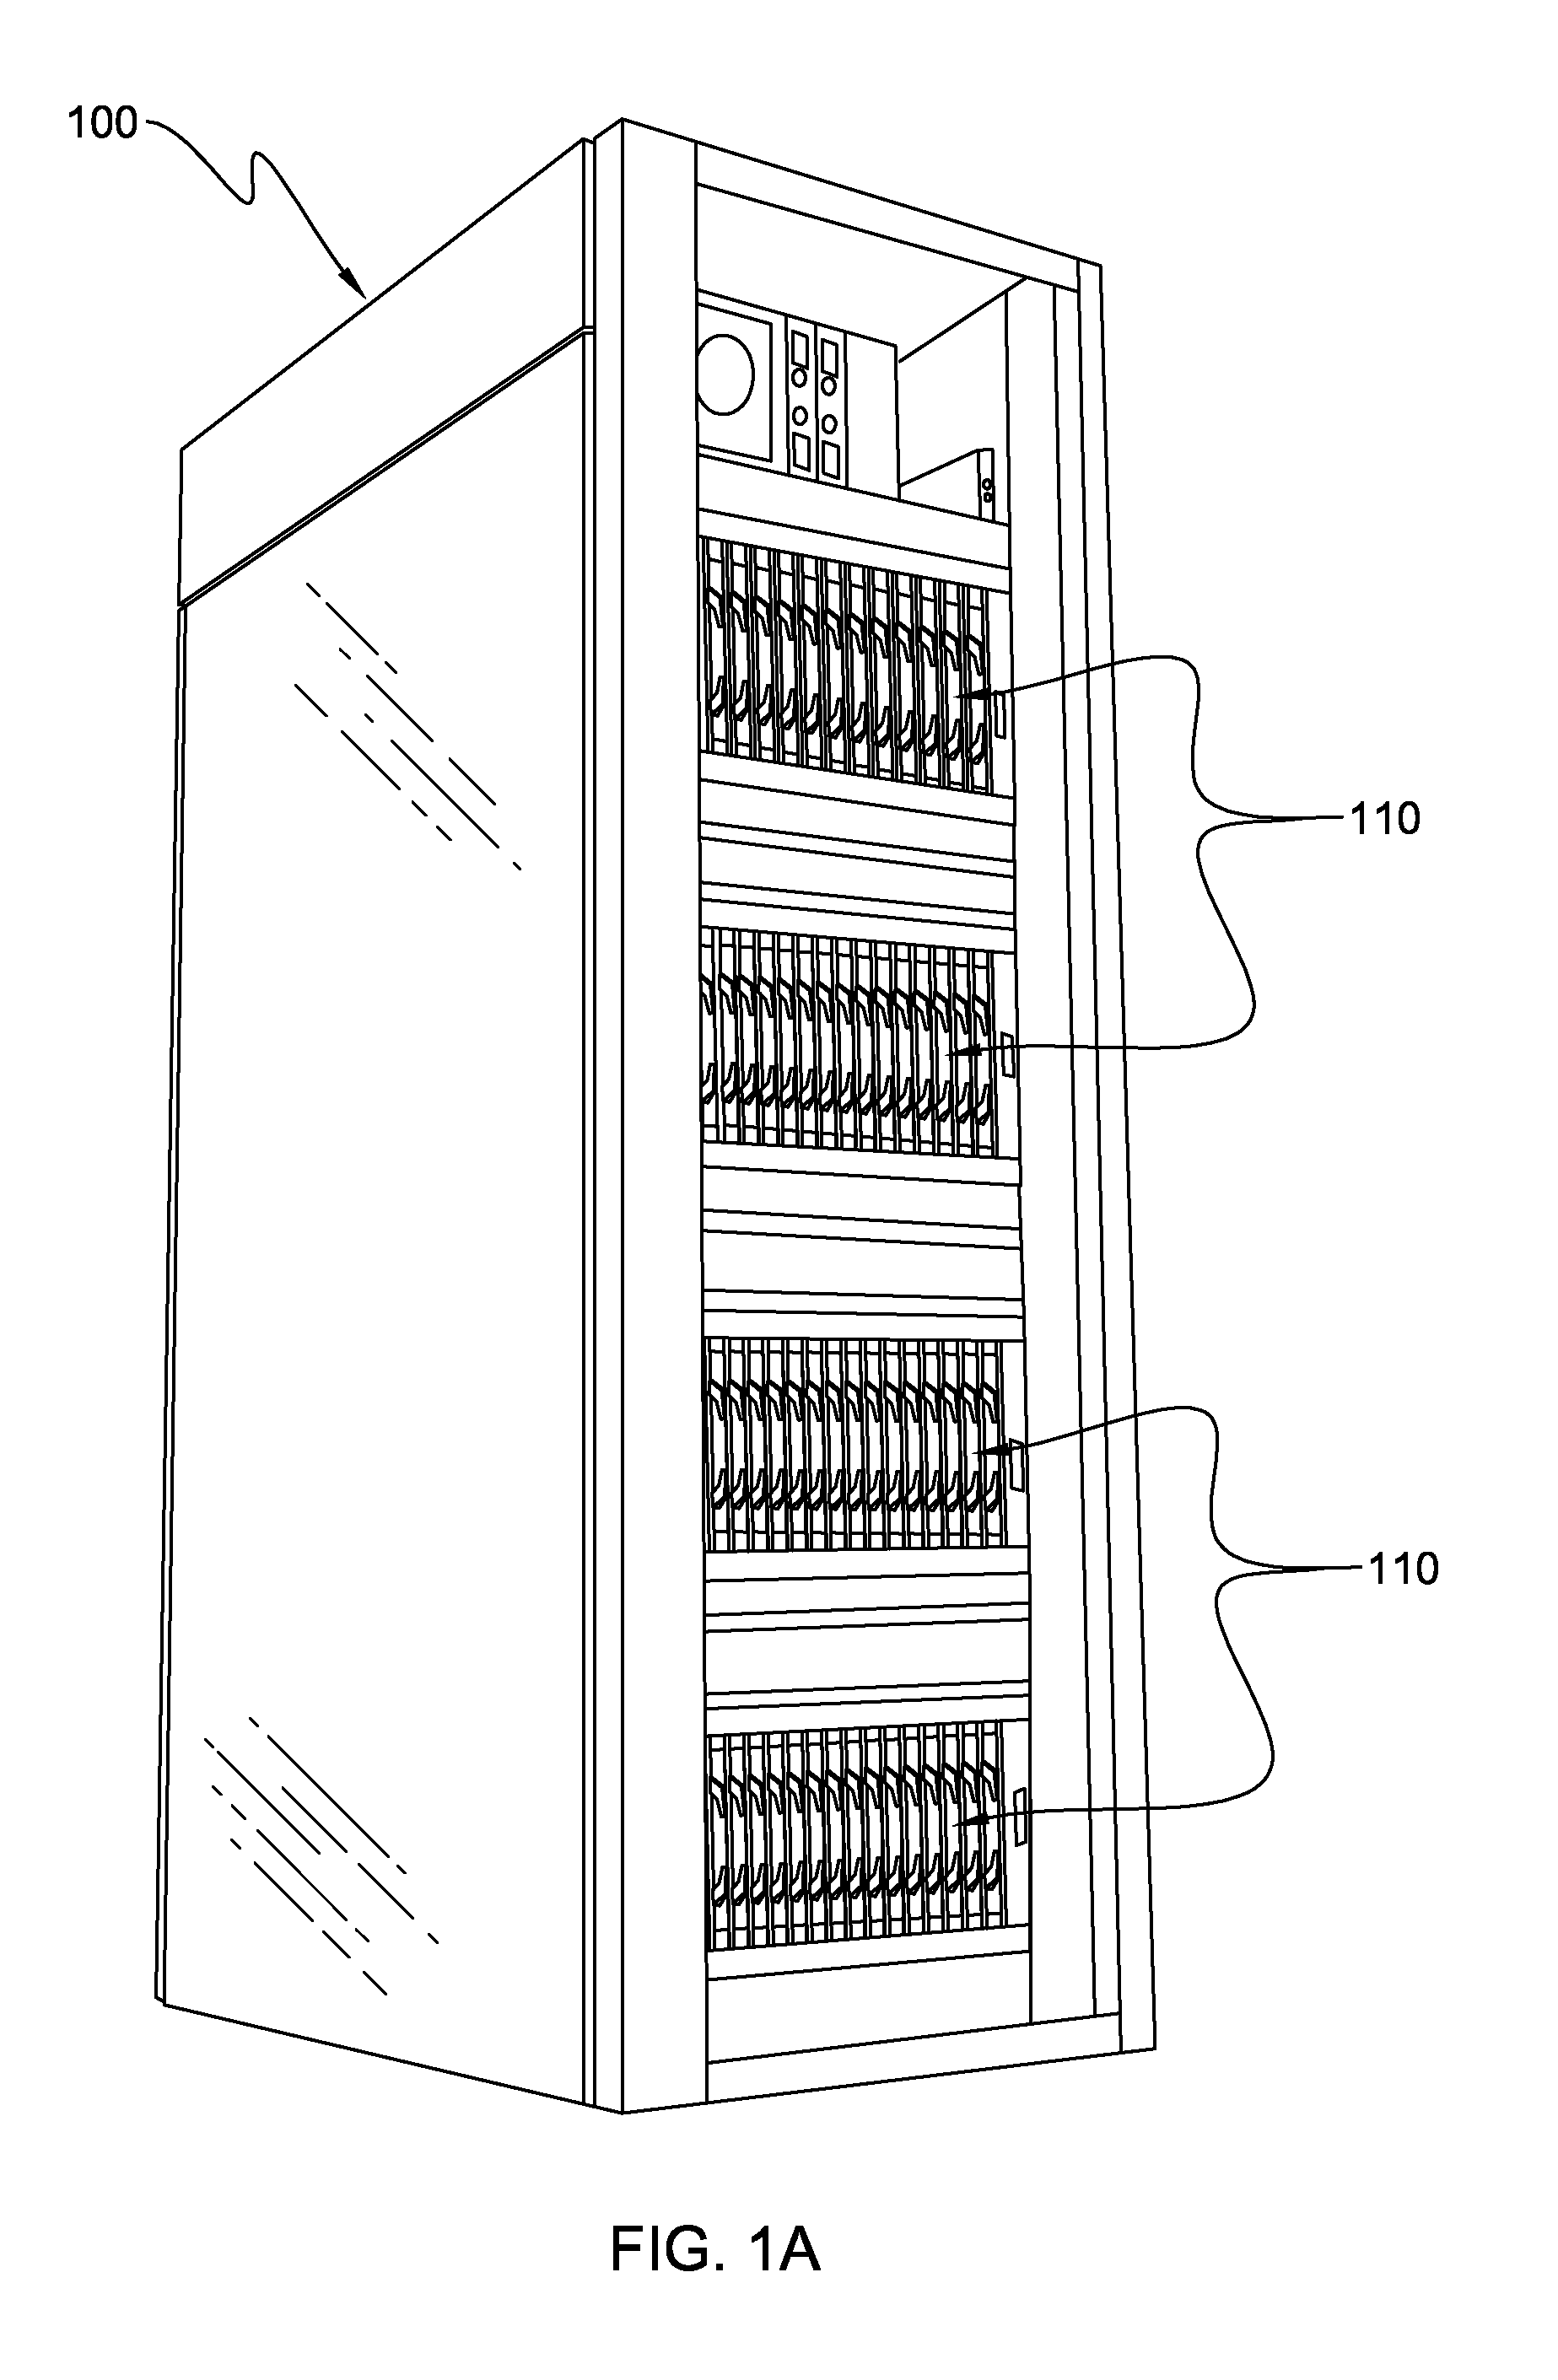 Liquid cooling apparatus and method for cooling blades of an electronic system chassis